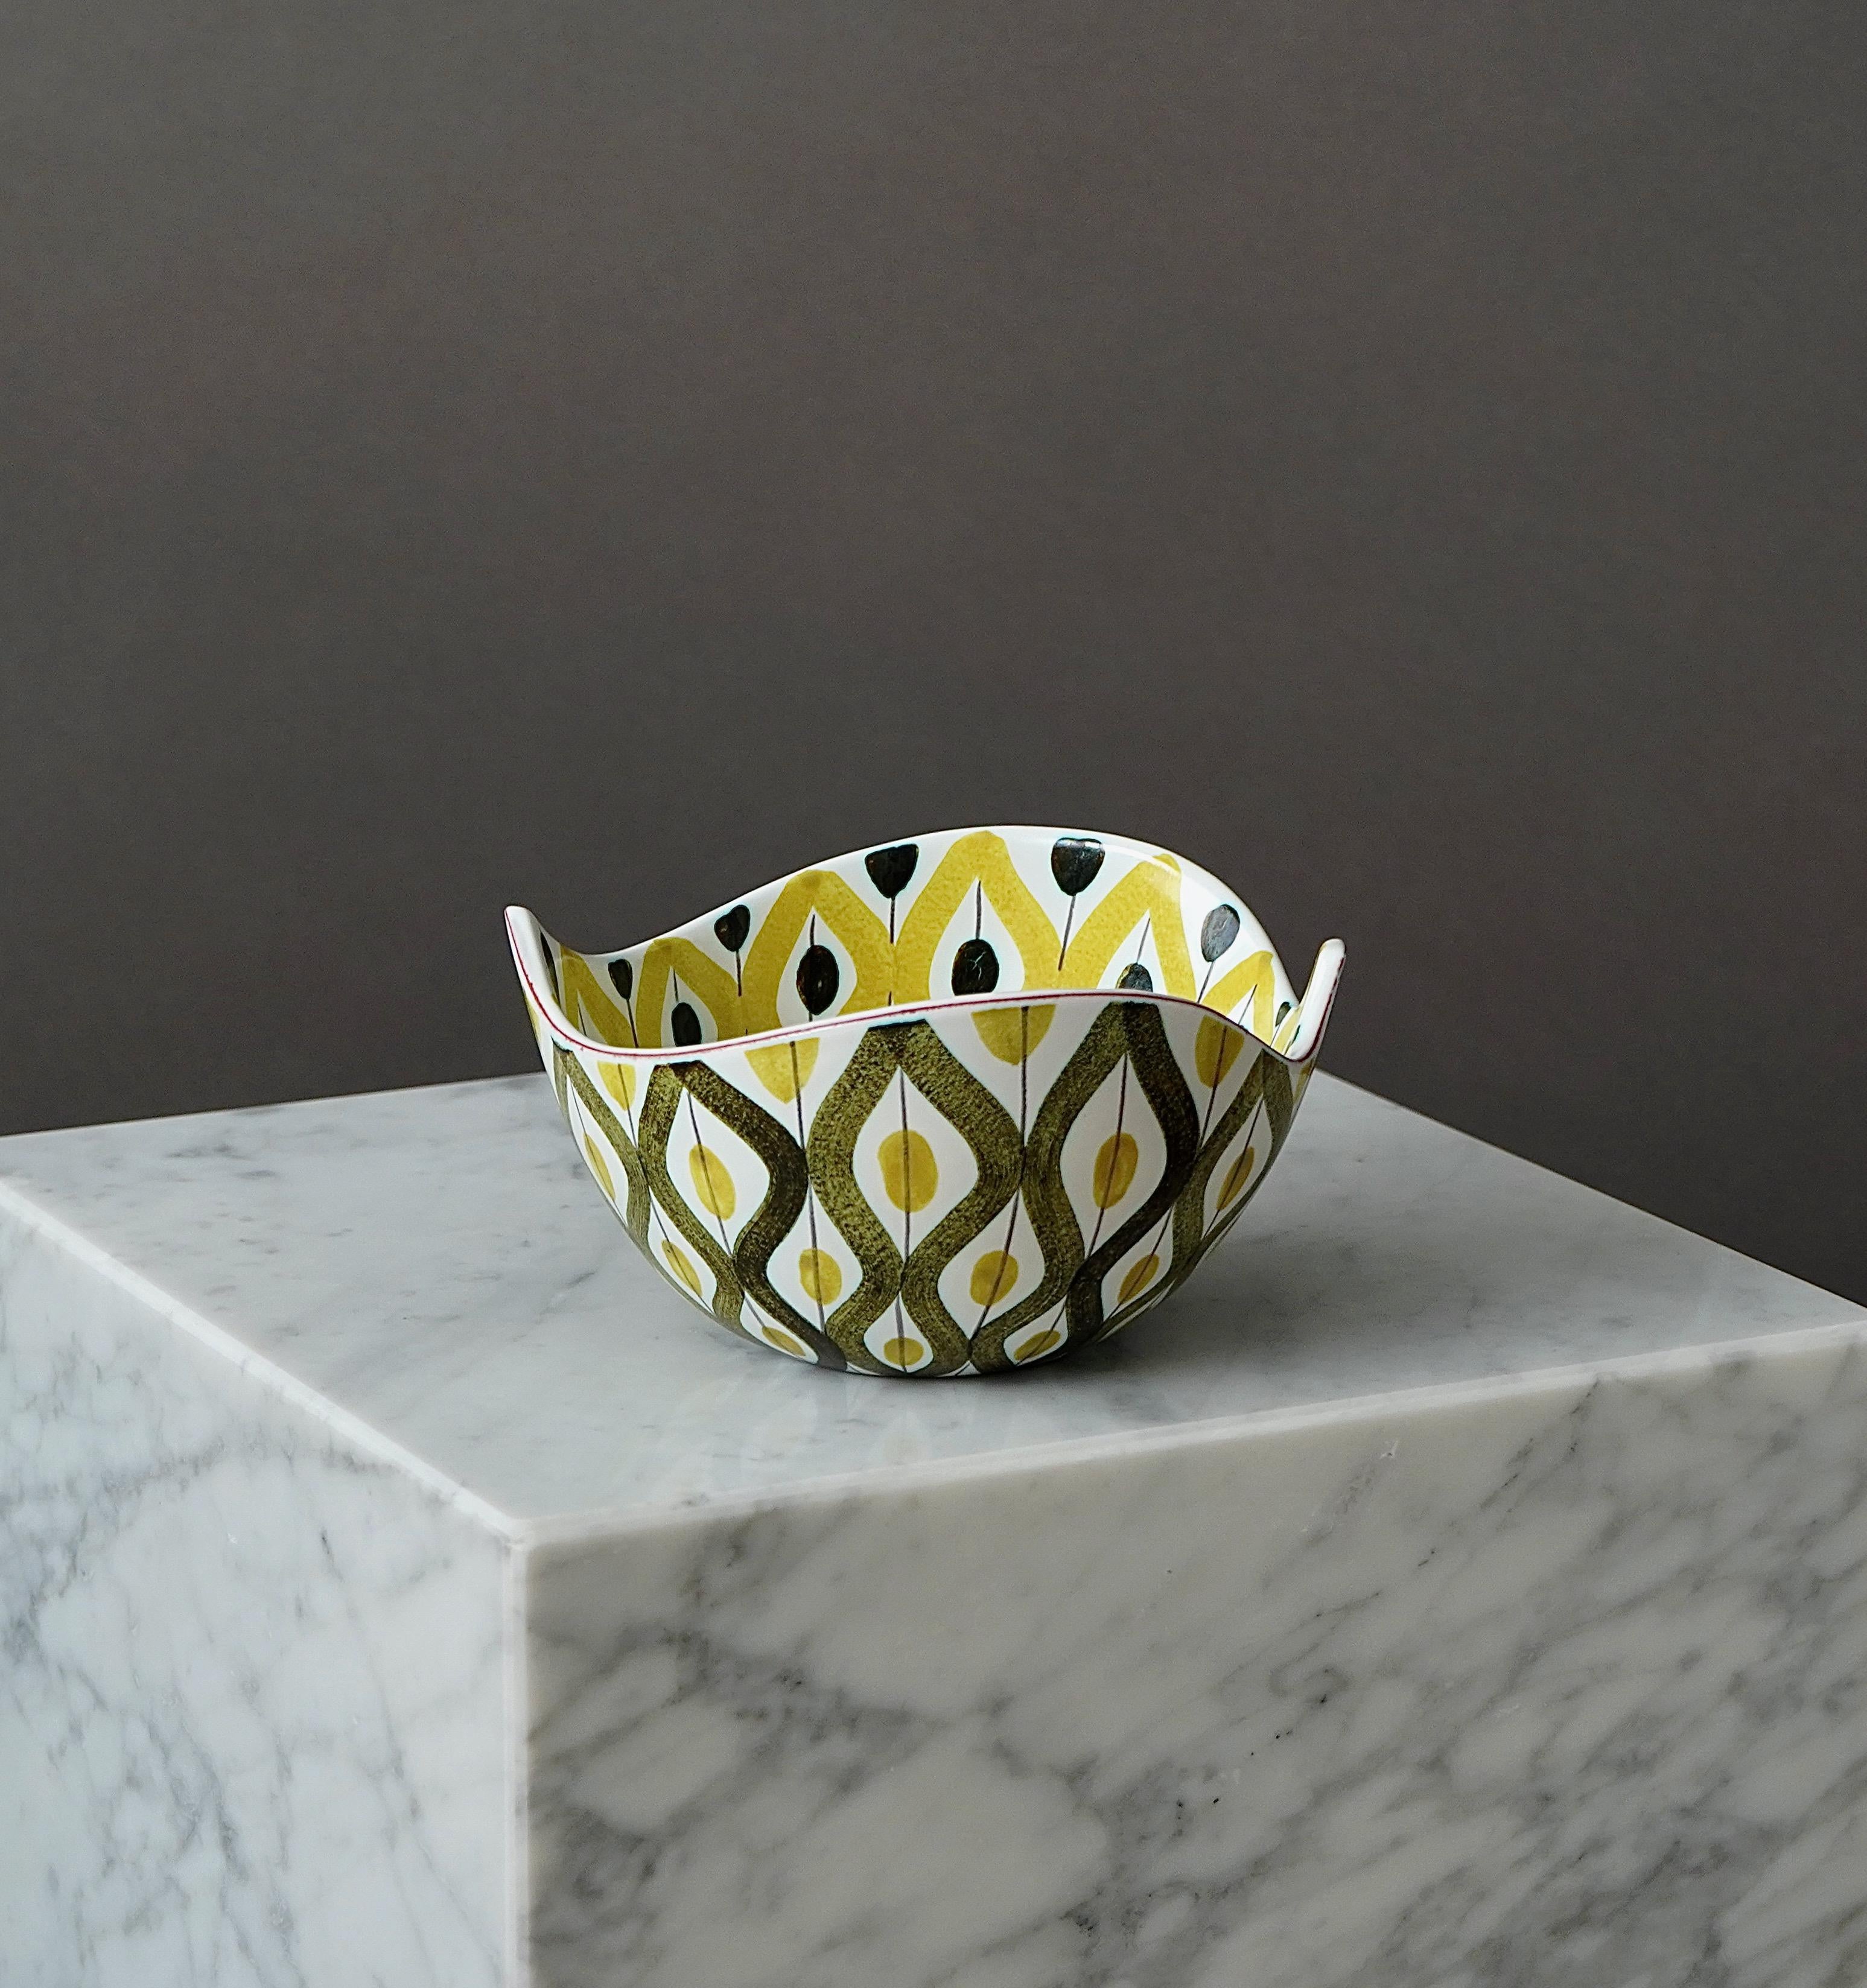 A beautiful faience bowl with amazing geometric pattern.
Designed by Stig Lindberg in Gustavsberg Studio, Sweden, 1950s.

Excellent condition.
Signed with the Gustavsberg studio hand.

Stig Lindberg and Gustavsberg’s artistic leader Wilhelm Kåge